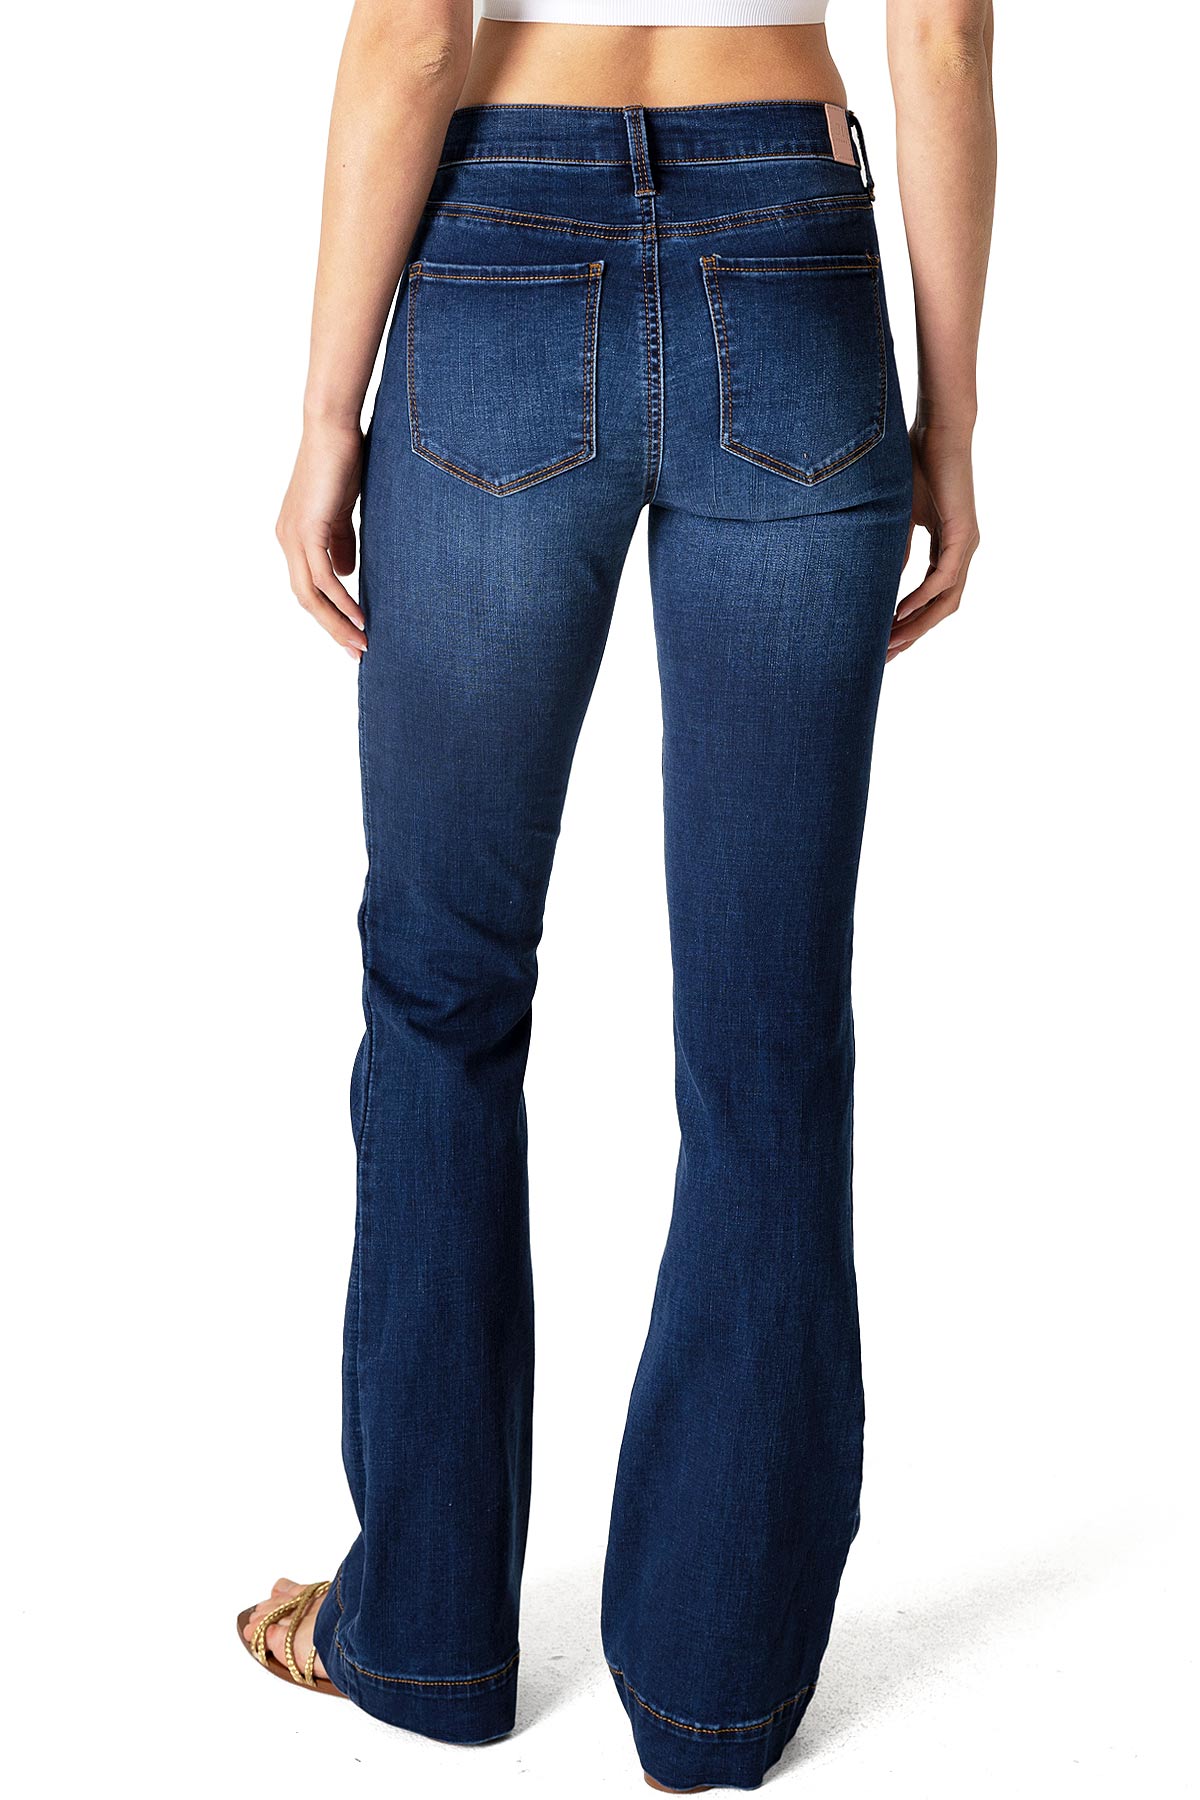 Poise Bootcut Jeans